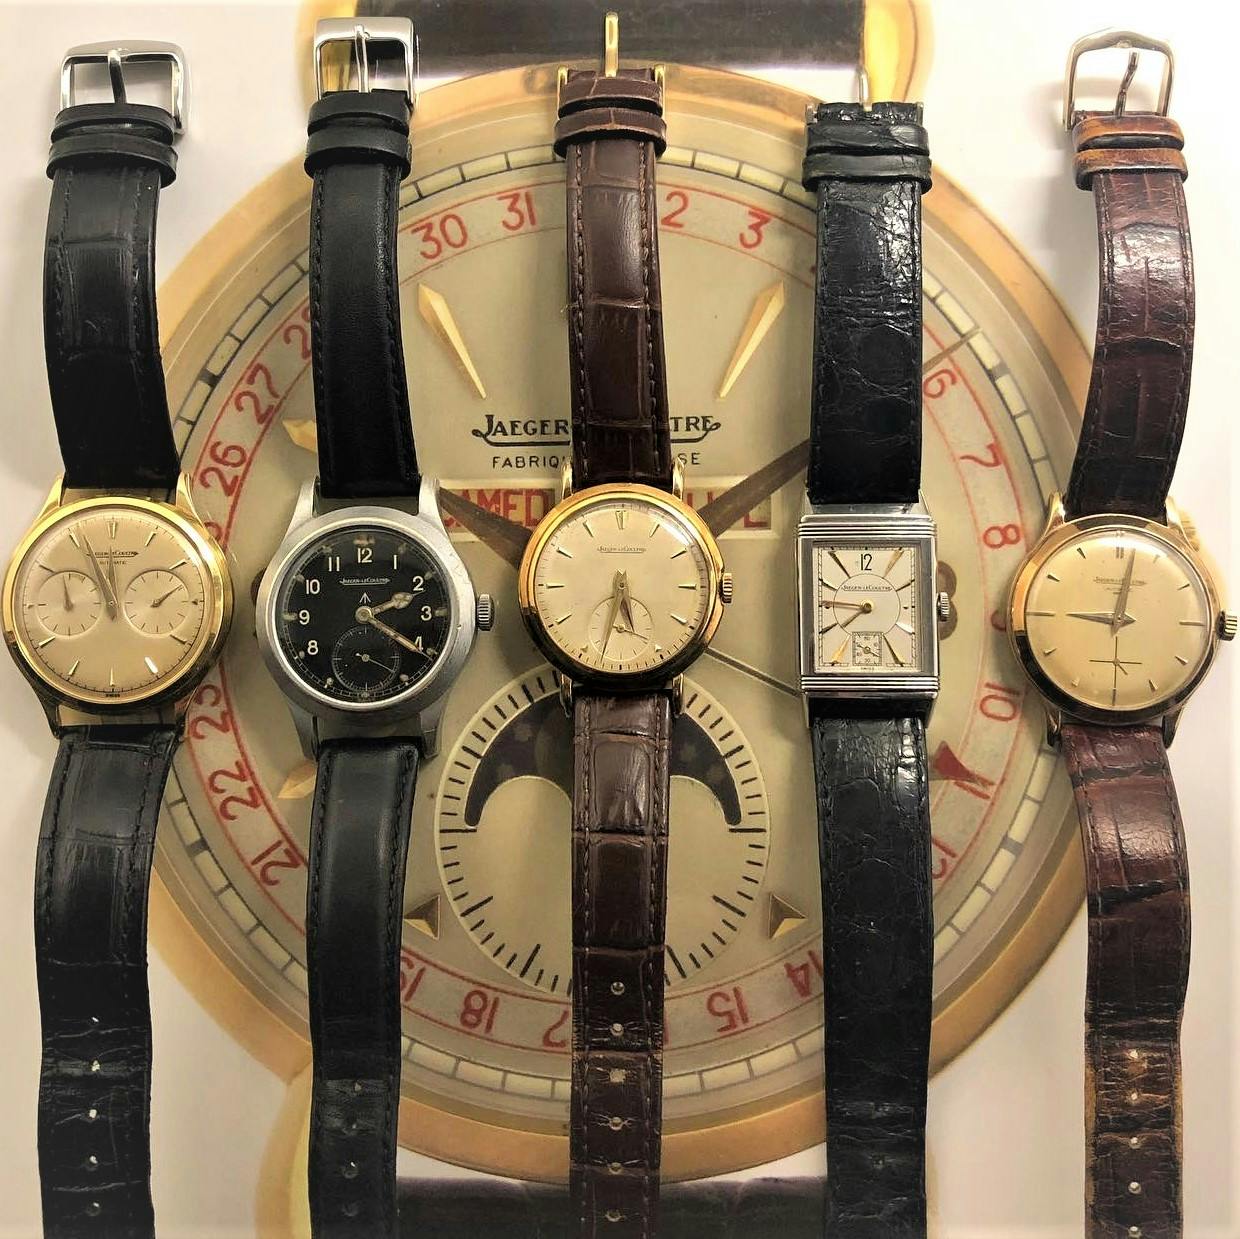 Five Jaeger LeCoultre Watches - From Right to Left: Futurematic, WWW "Dirty Dozen" Calibre 479, Gold Men's Watch, Reverso from 1946, Gold Men's Watch